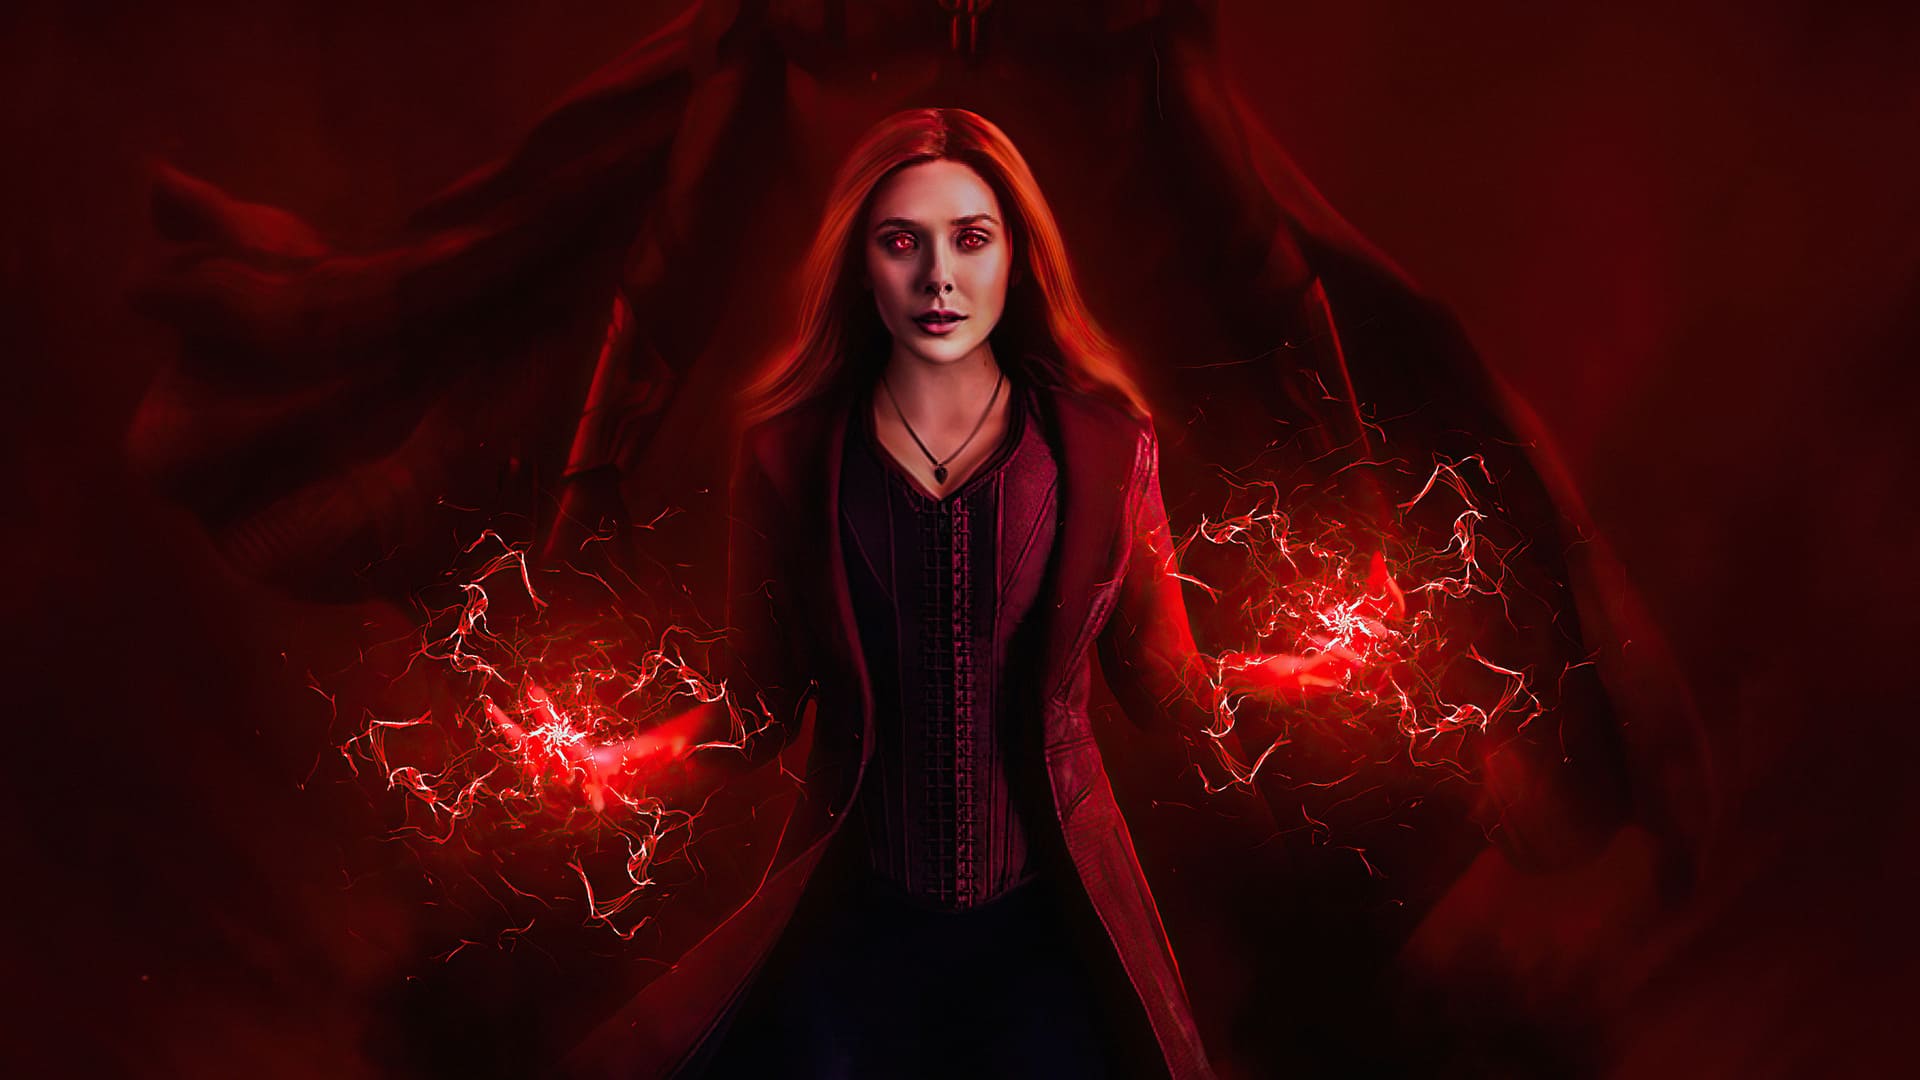 Scarlet Witch Wallpapers   Top 35 Best Scarlet Witch Backgrounds